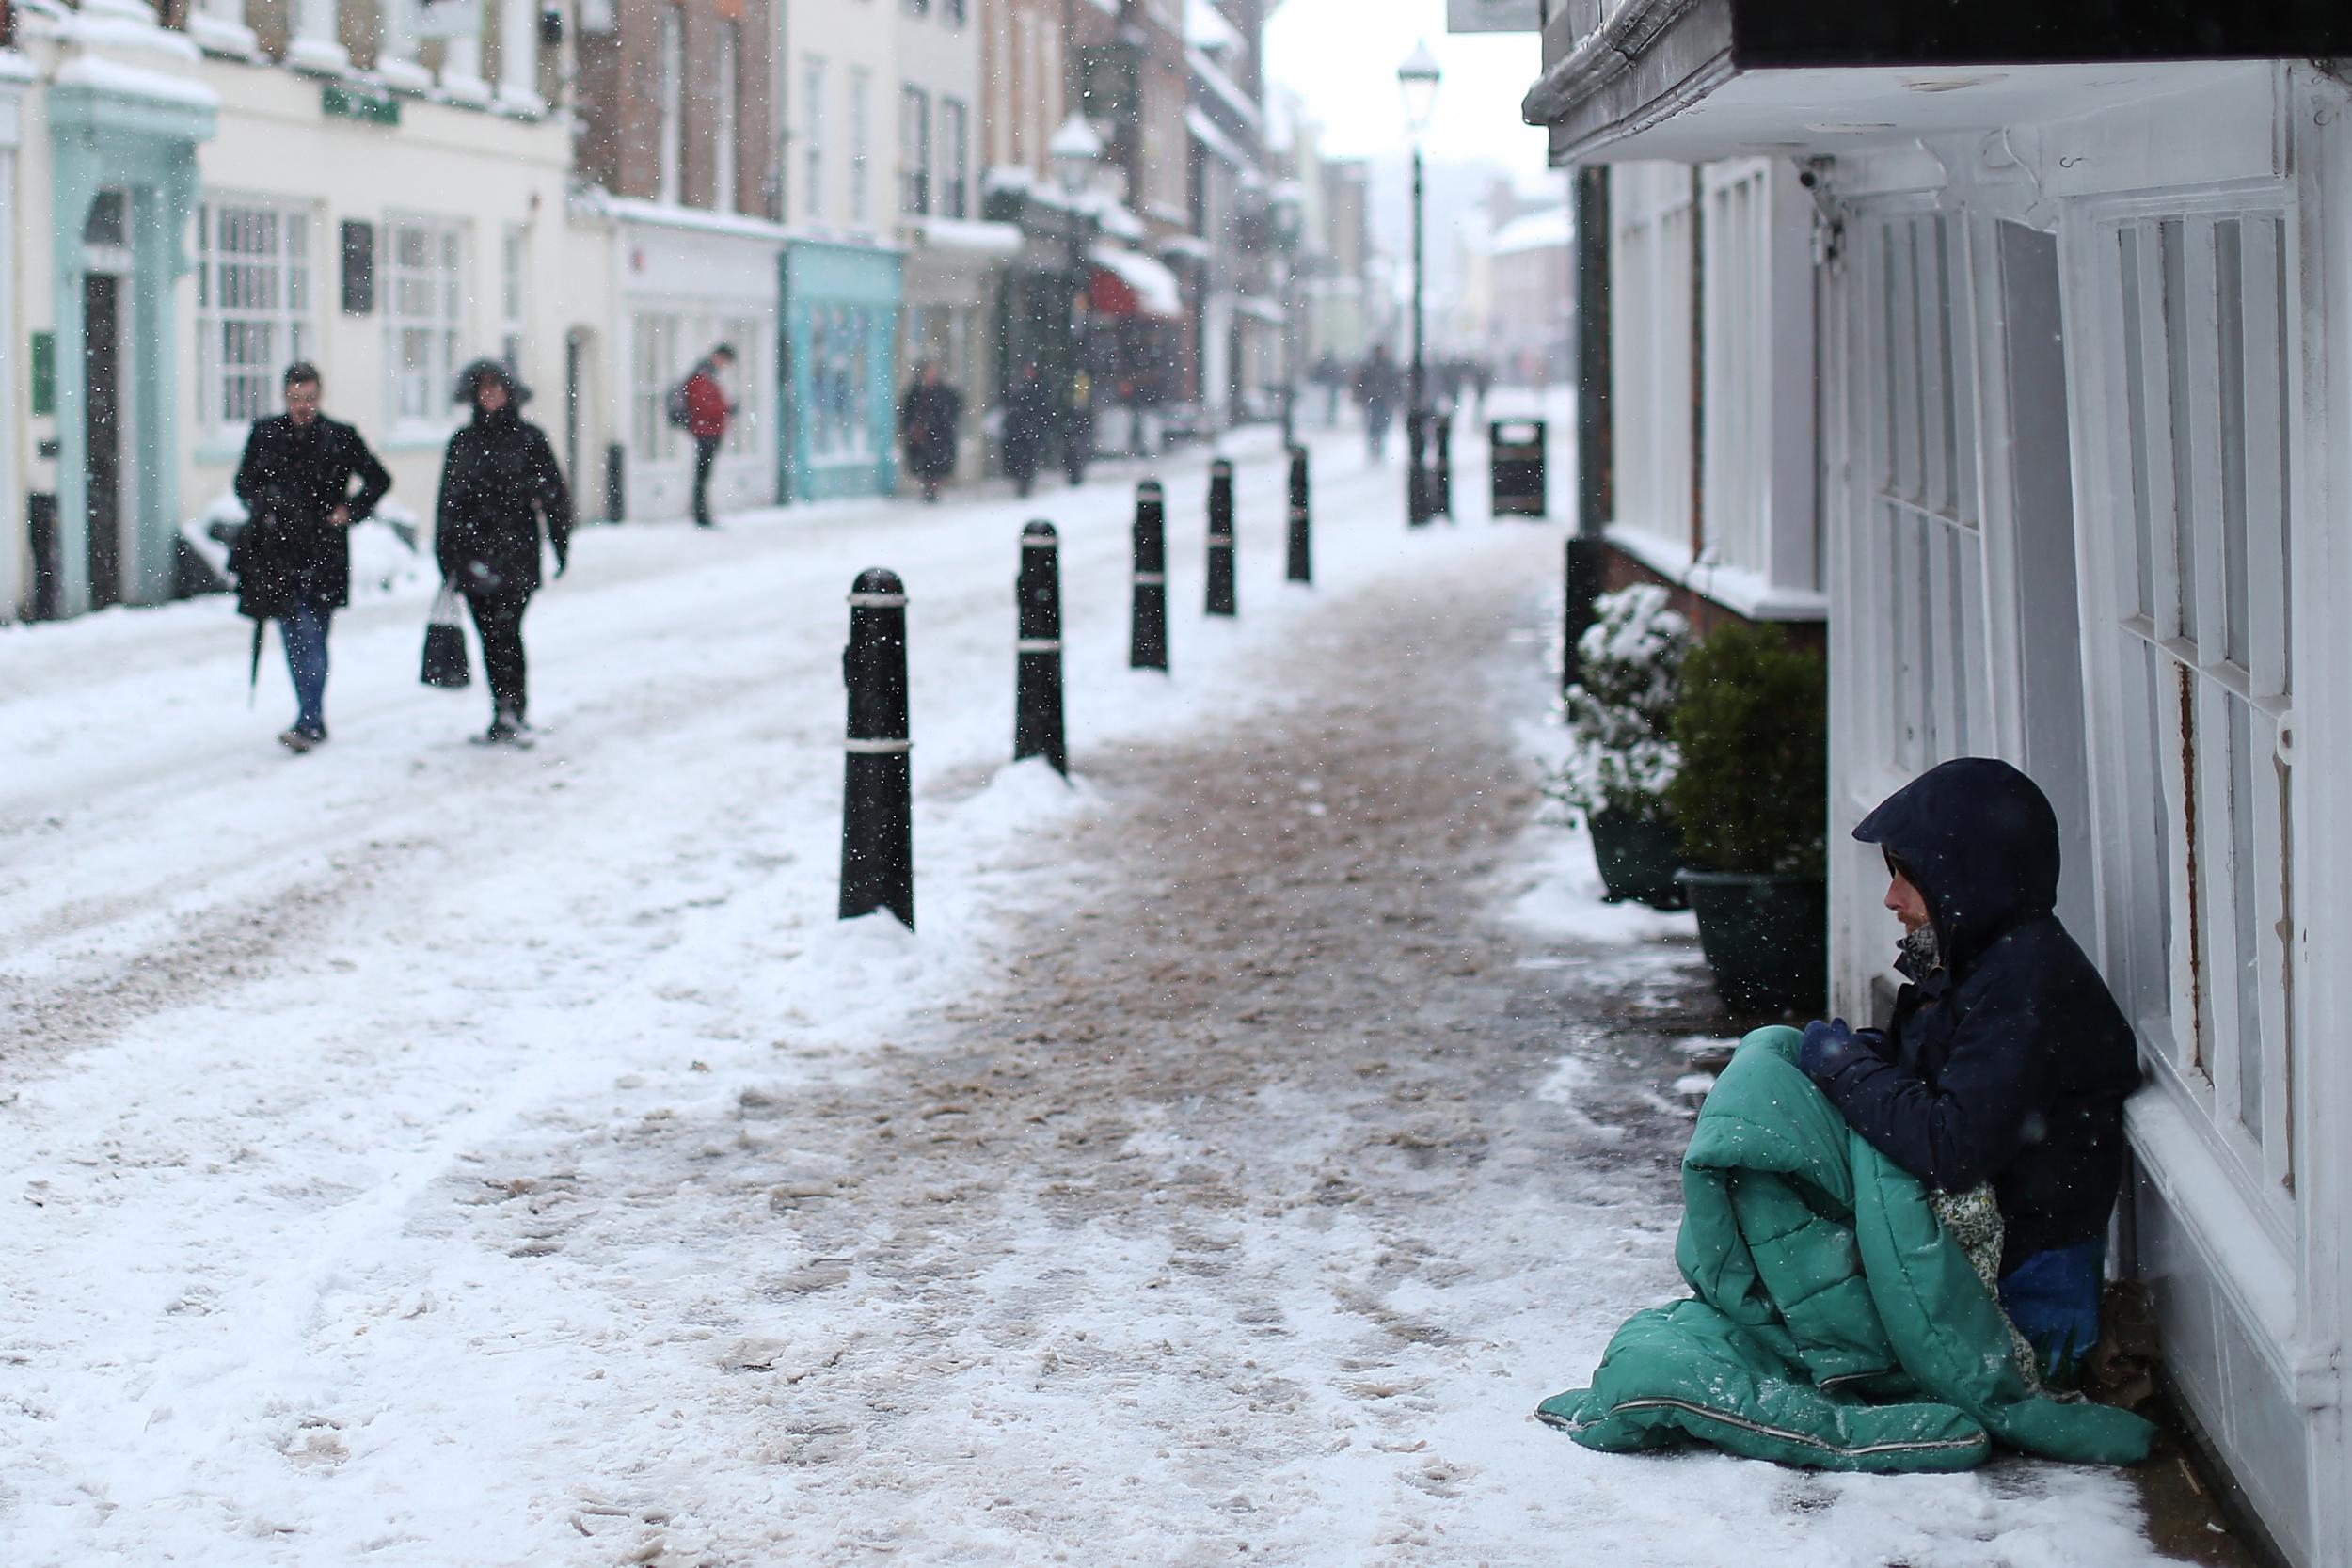 'The homeless have literally frozen to death on the streets in recent months'